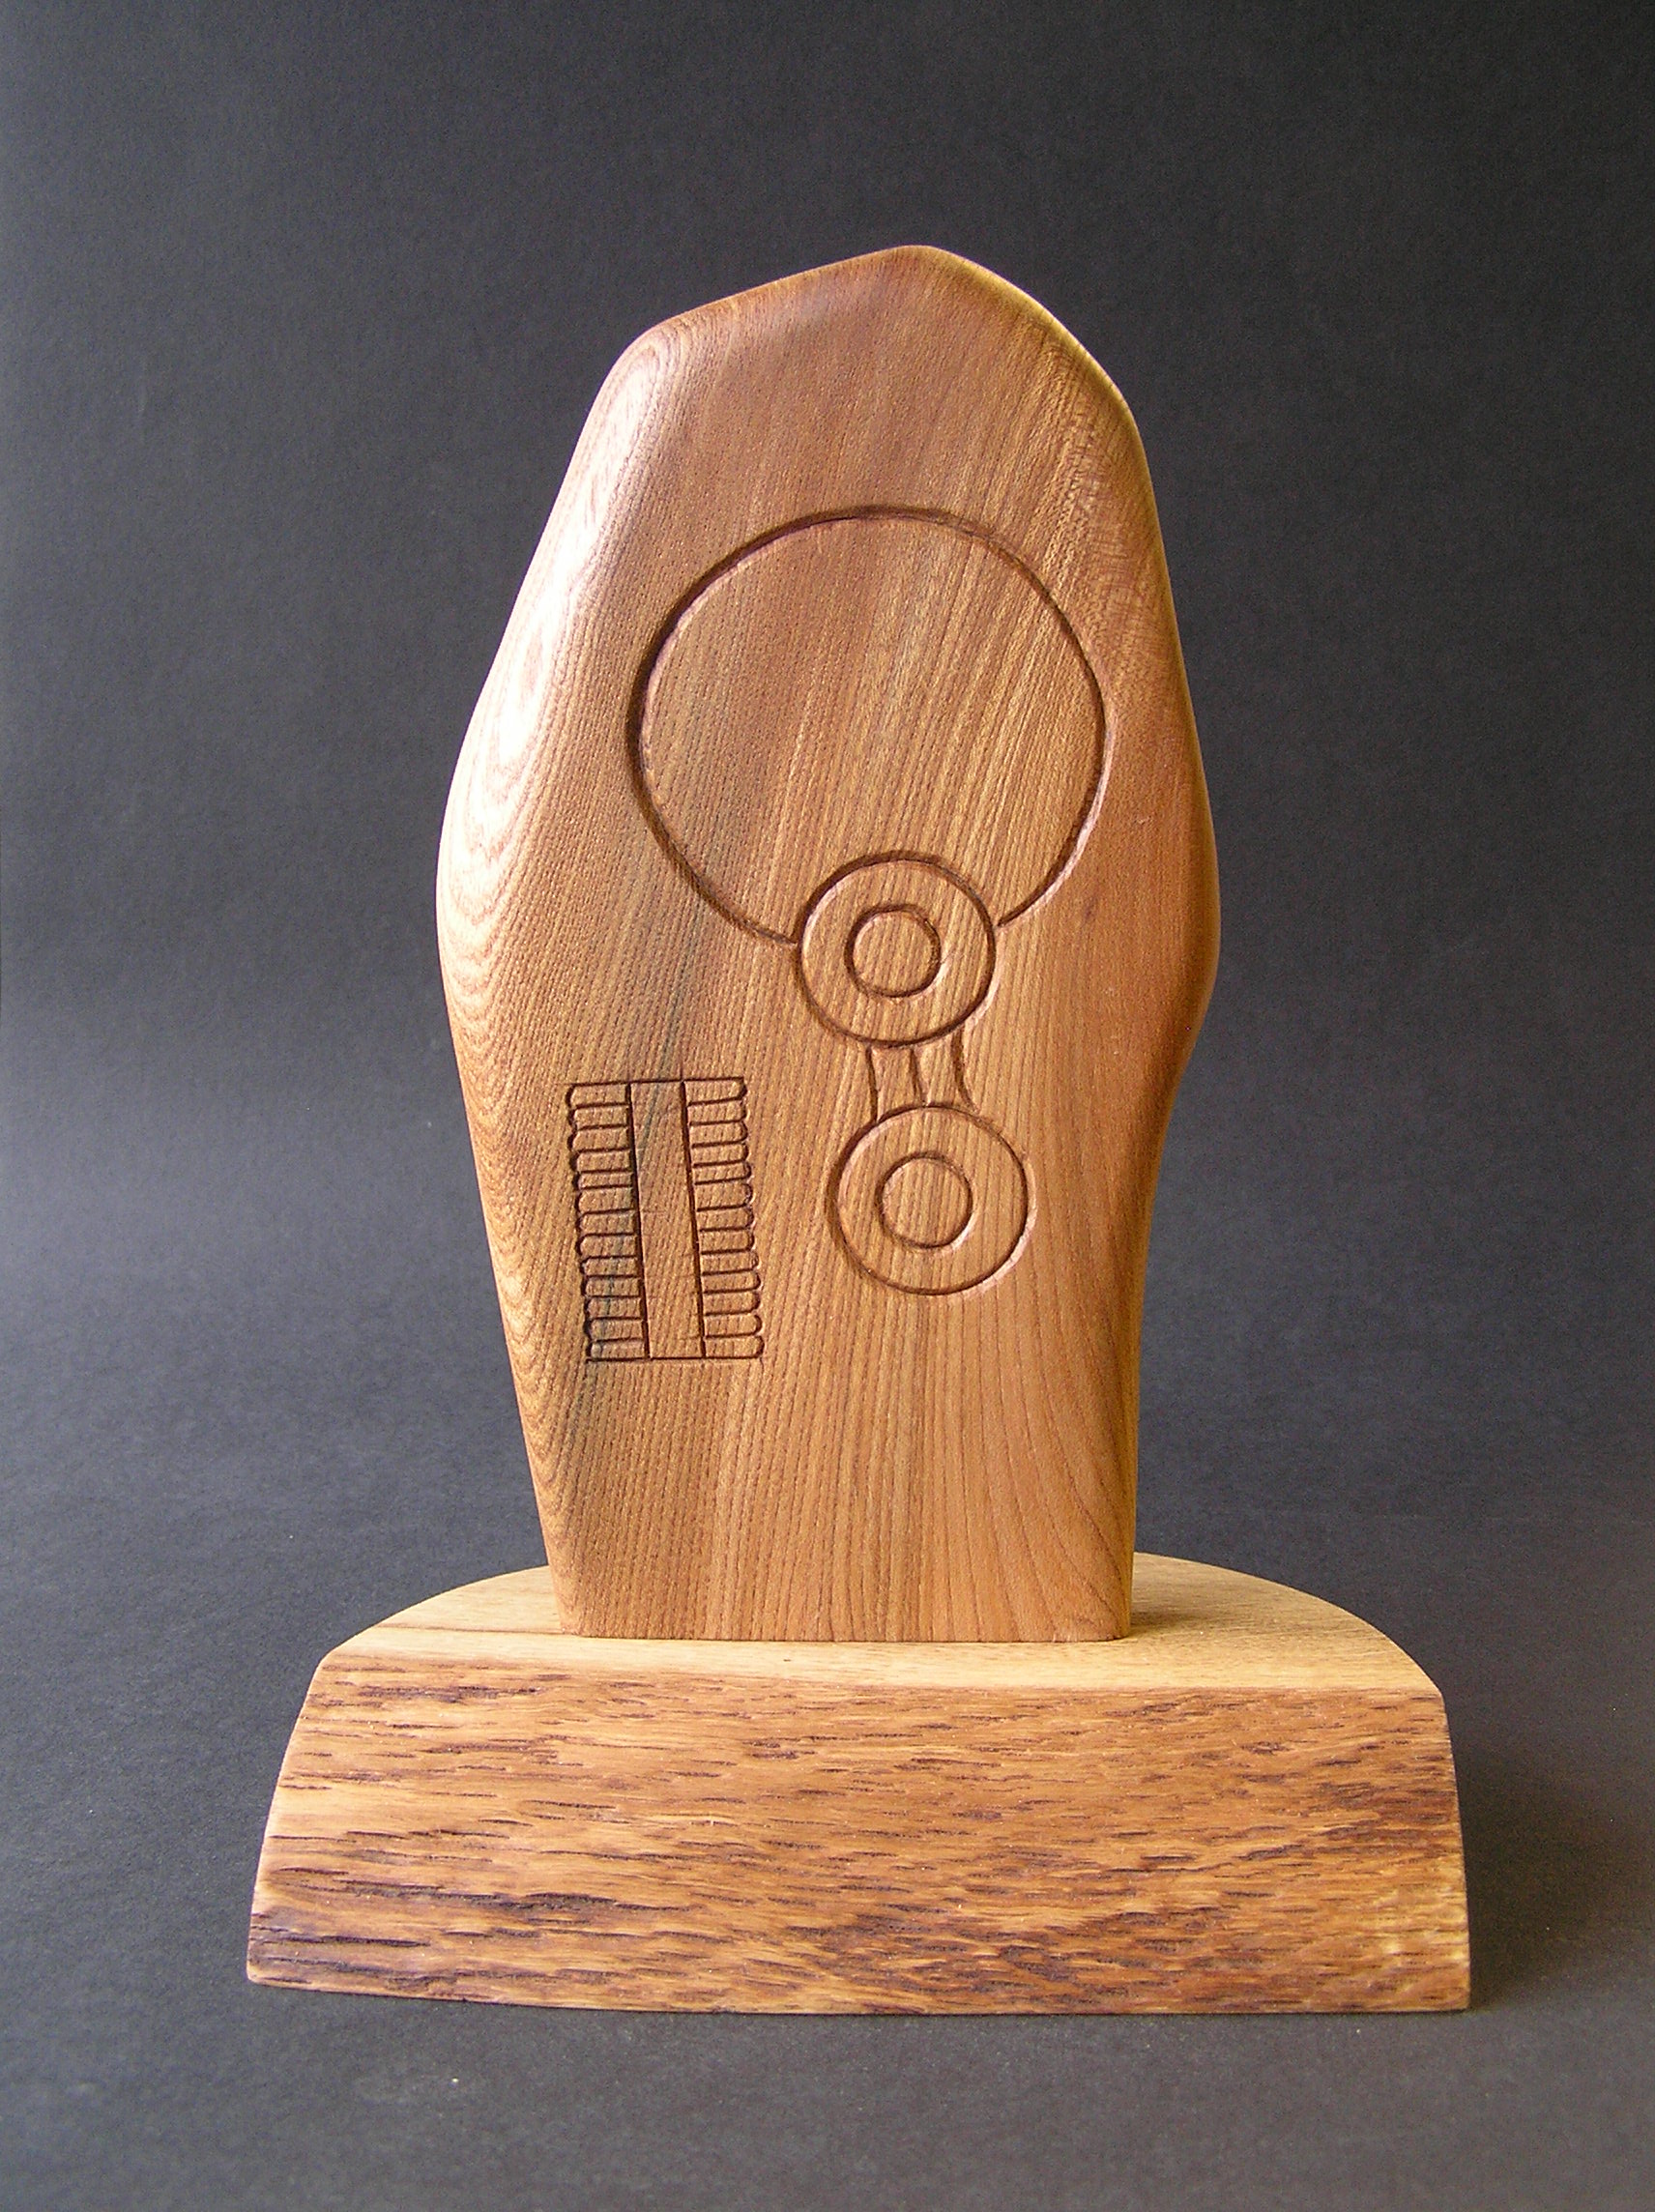 mirror and comb, hand carved, Pictish symbols, oak, elm, bespoke carving, pictish art, sustainably sourced wood,